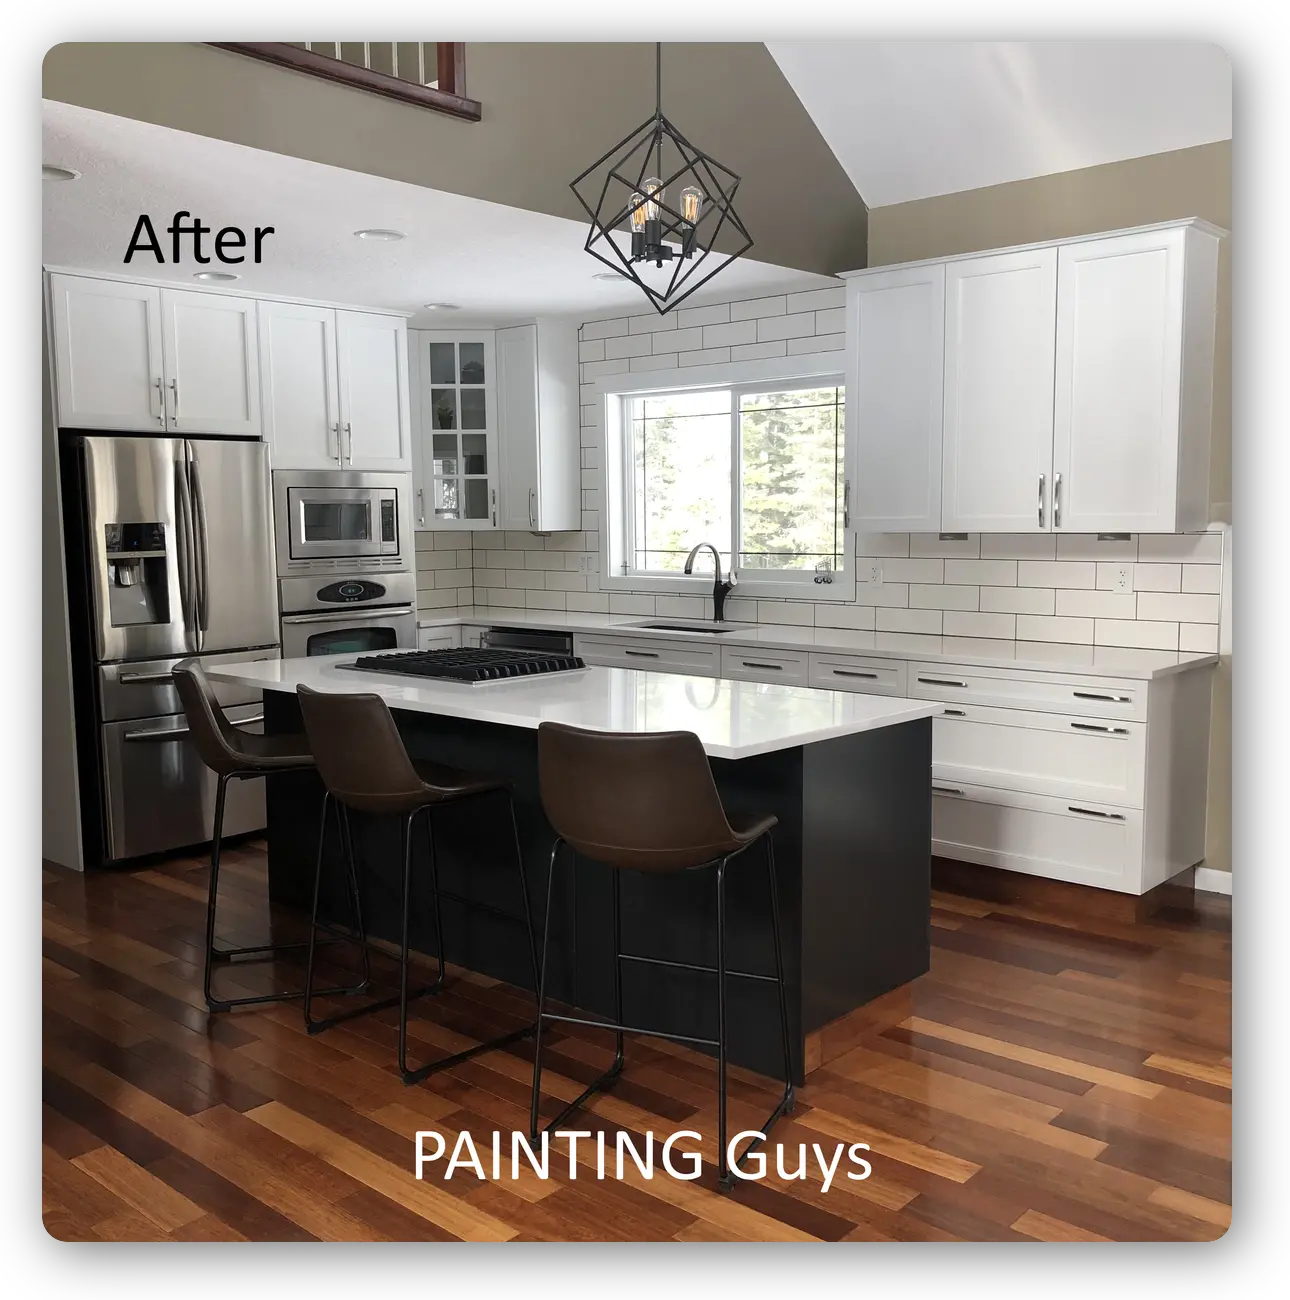 Black and White kitchen cabinets